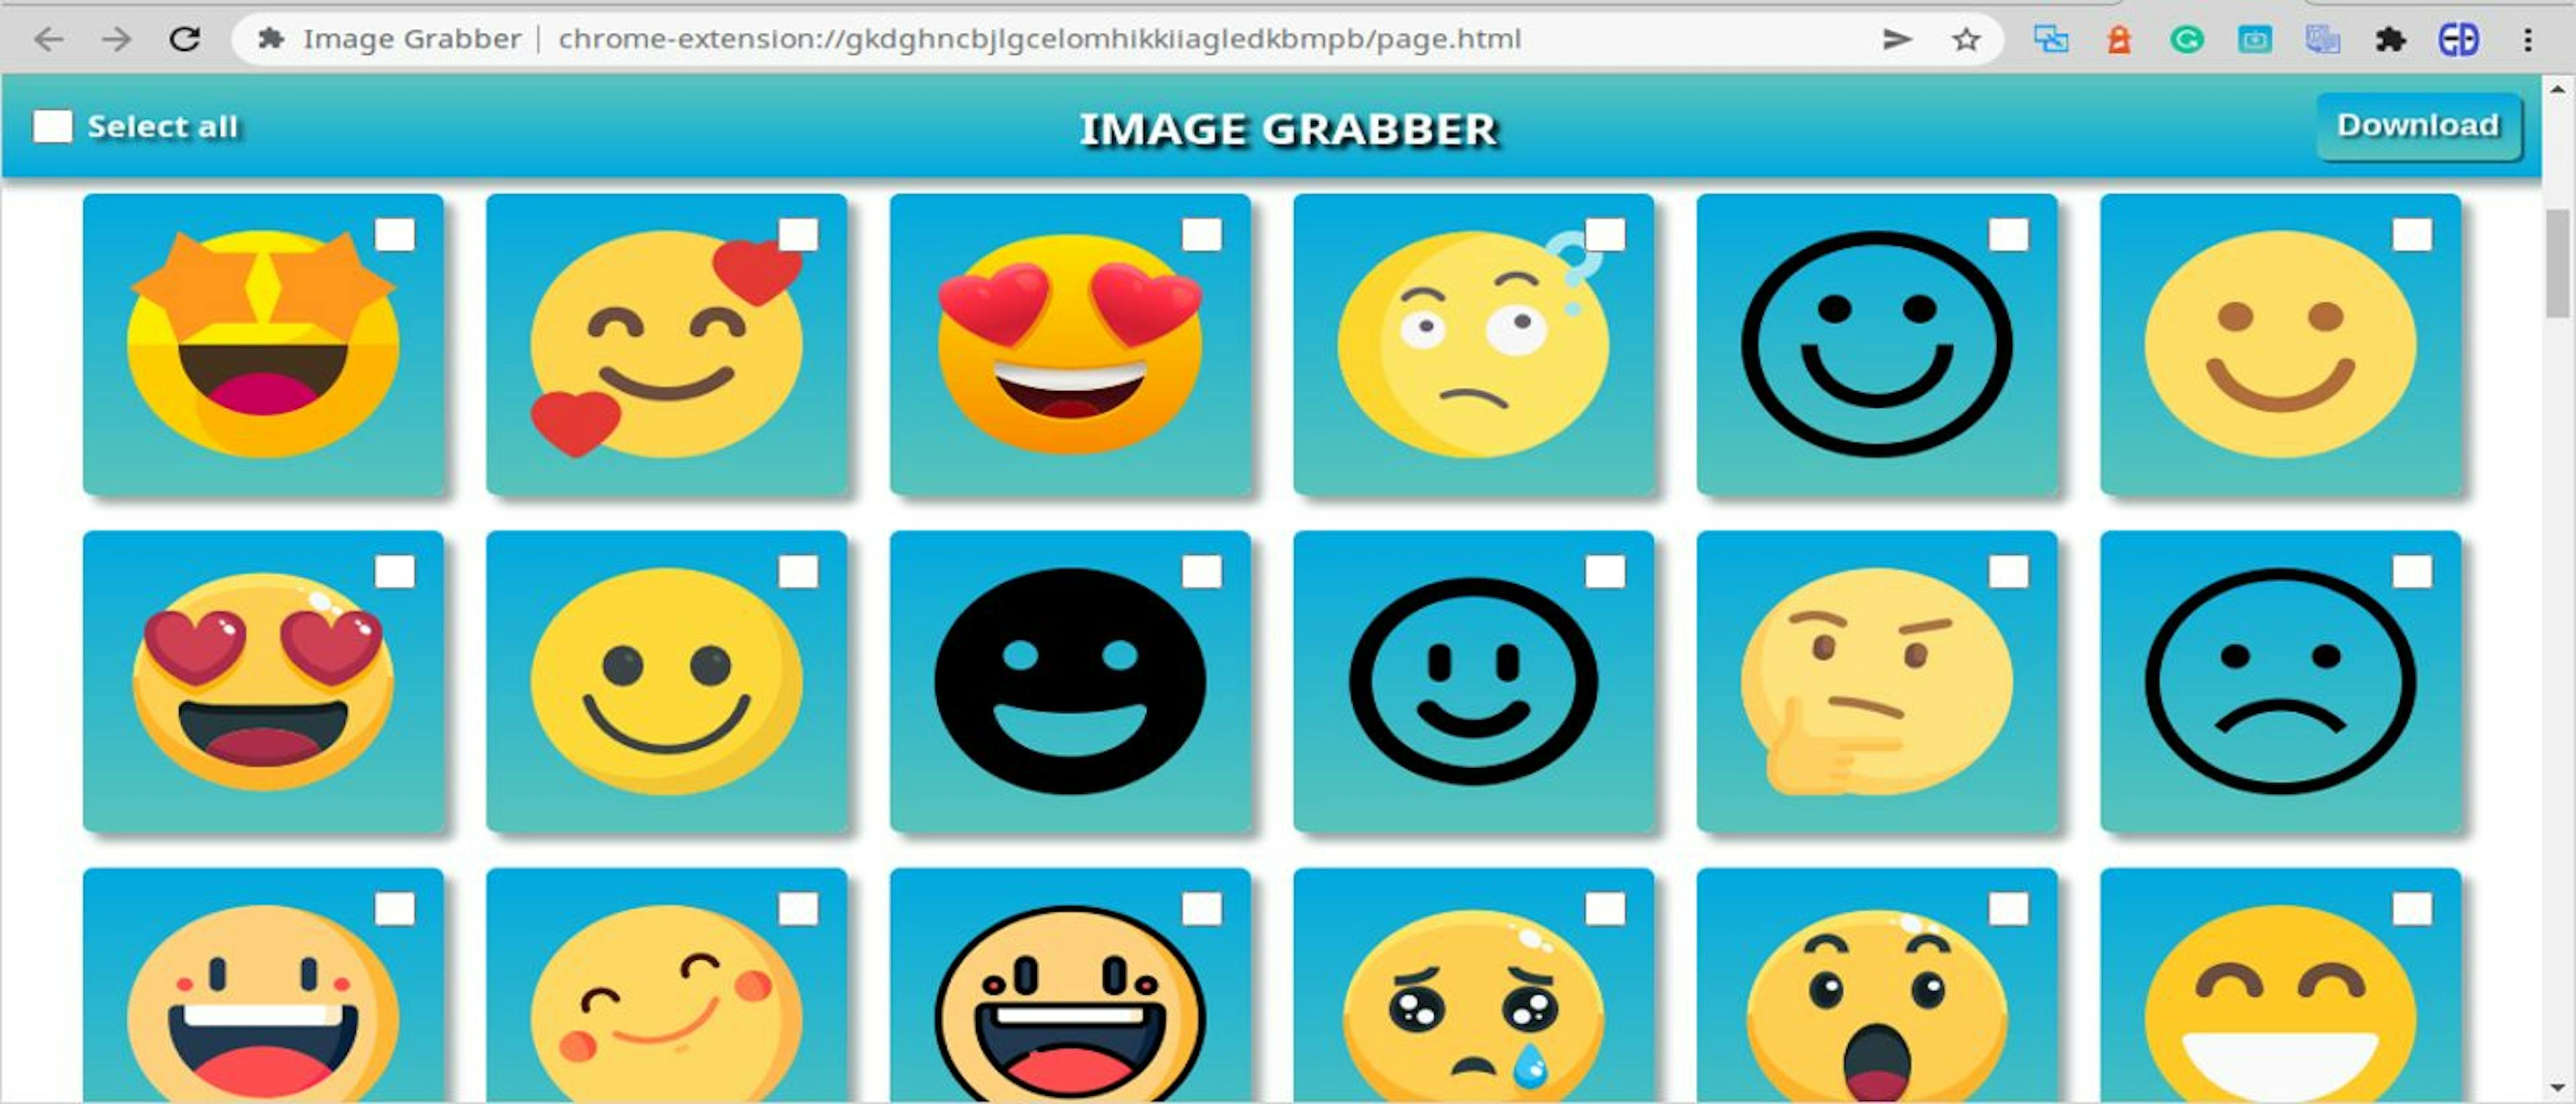 /how-to-create-a-google-chrome-extension-part-2-image-grabber feature image